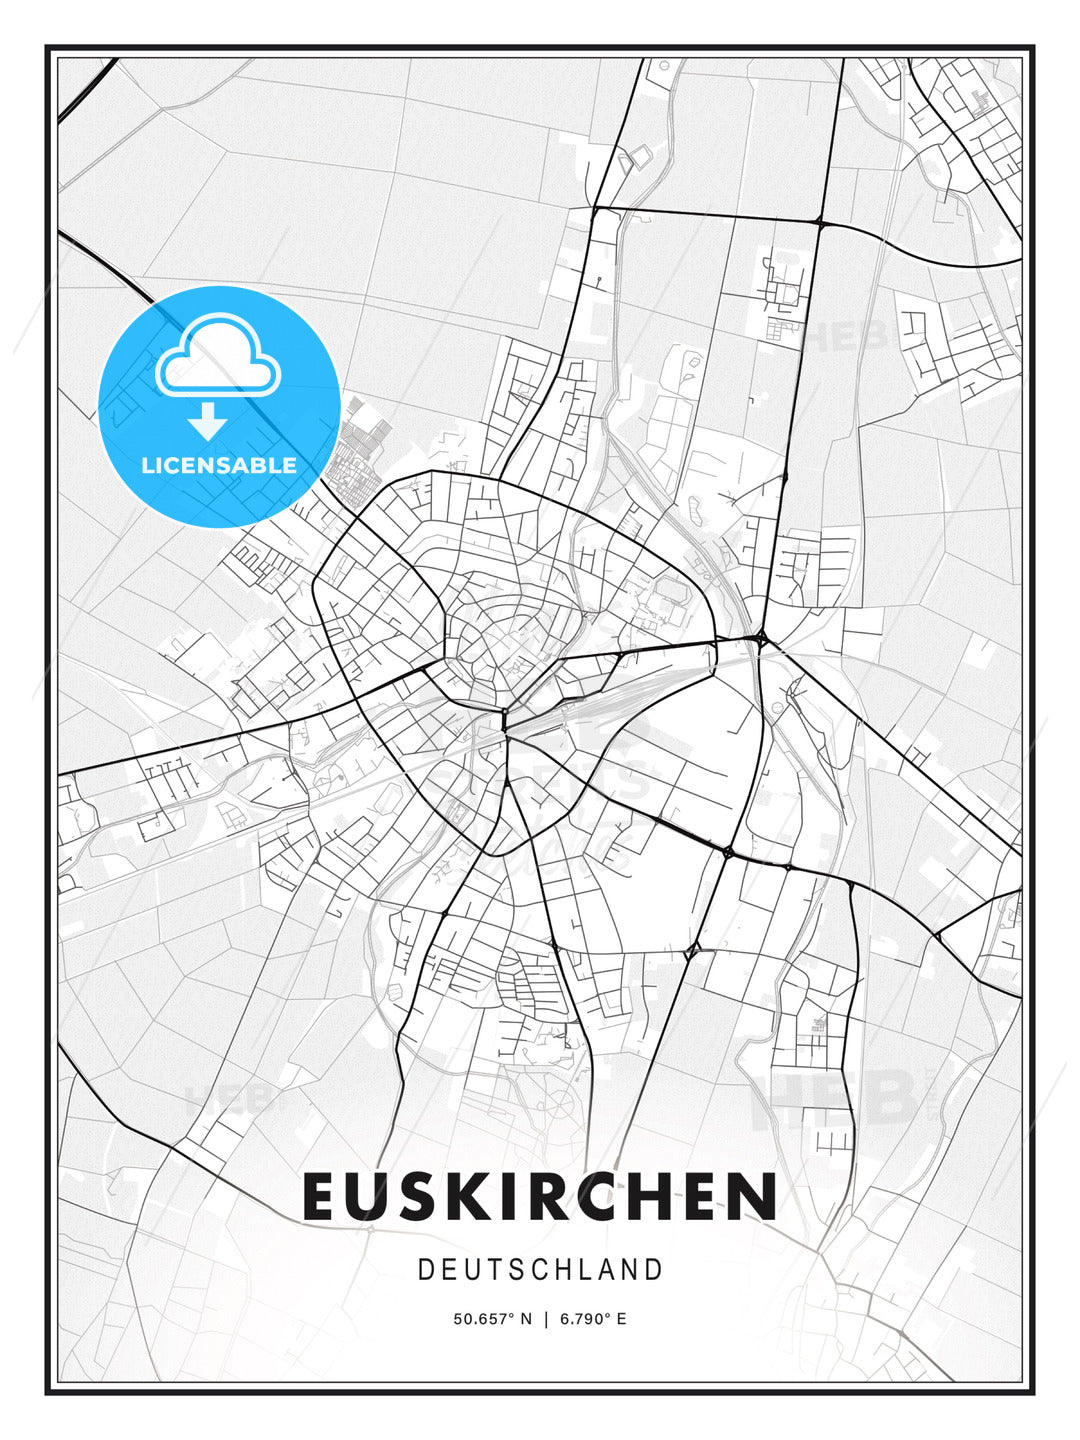 Euskirchen, Germany, Modern Print Template in Various Formats - HEBSTREITS Sketches